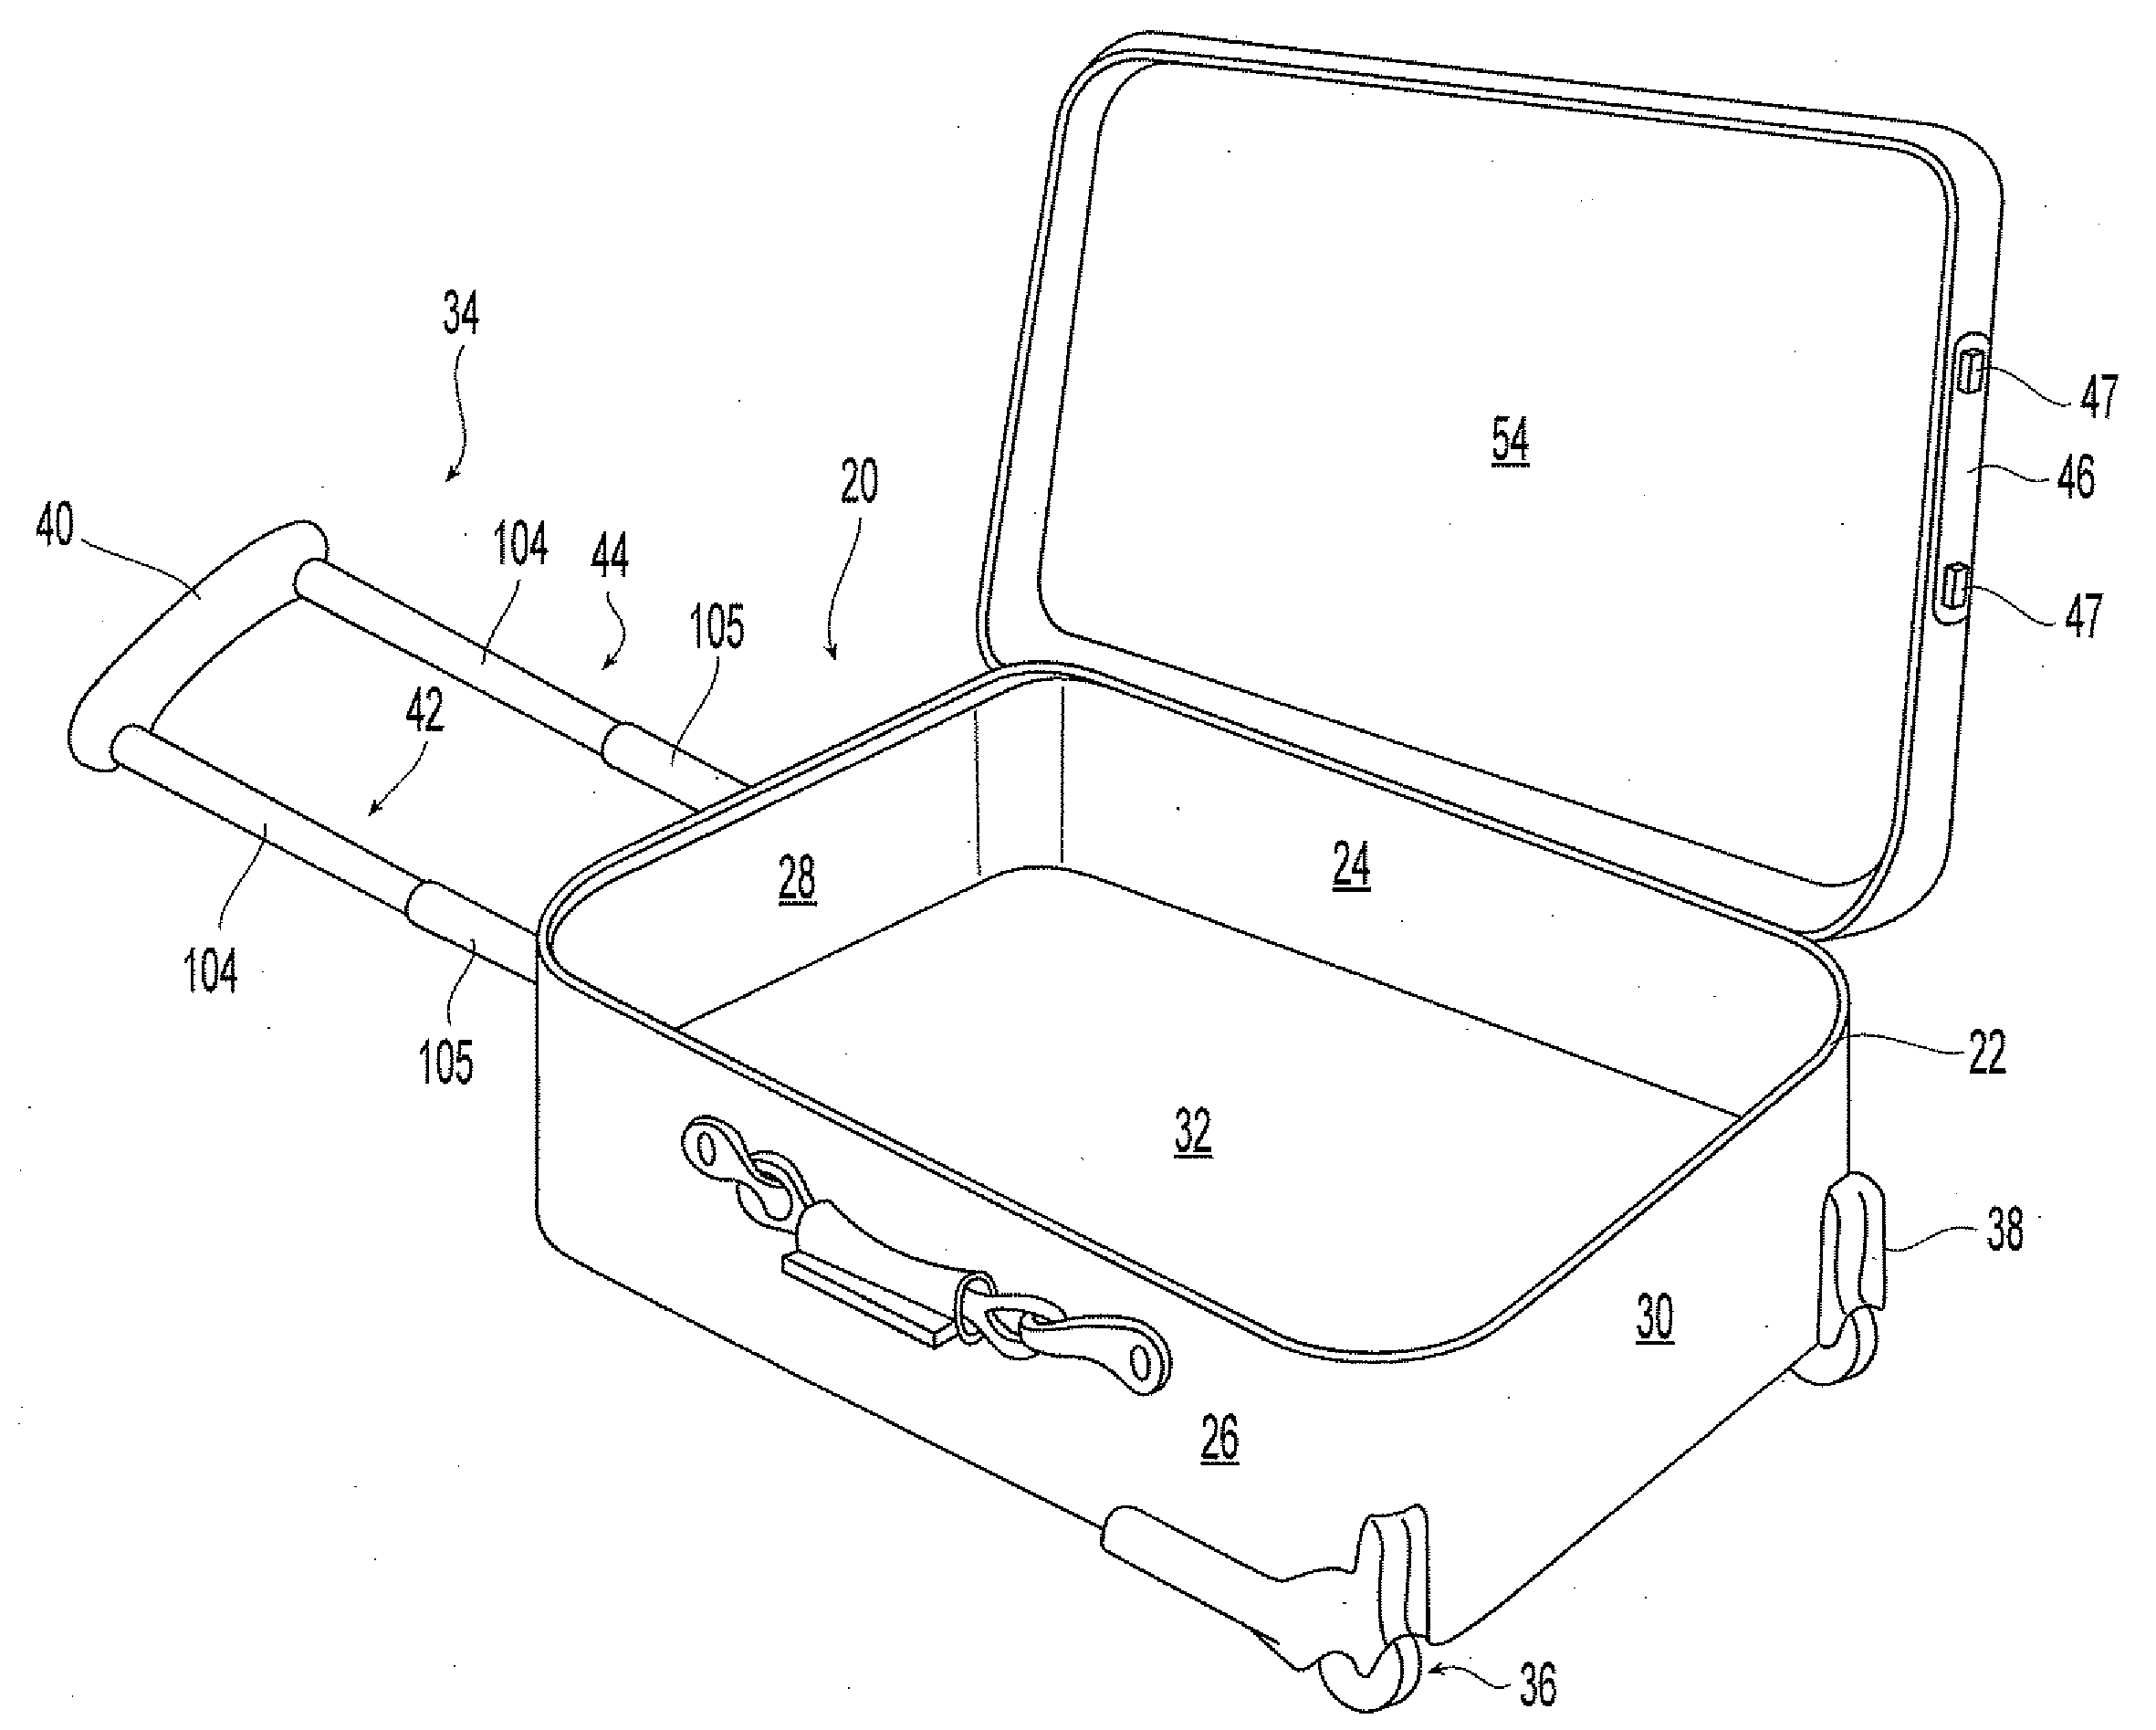 Flat packing suitcase system